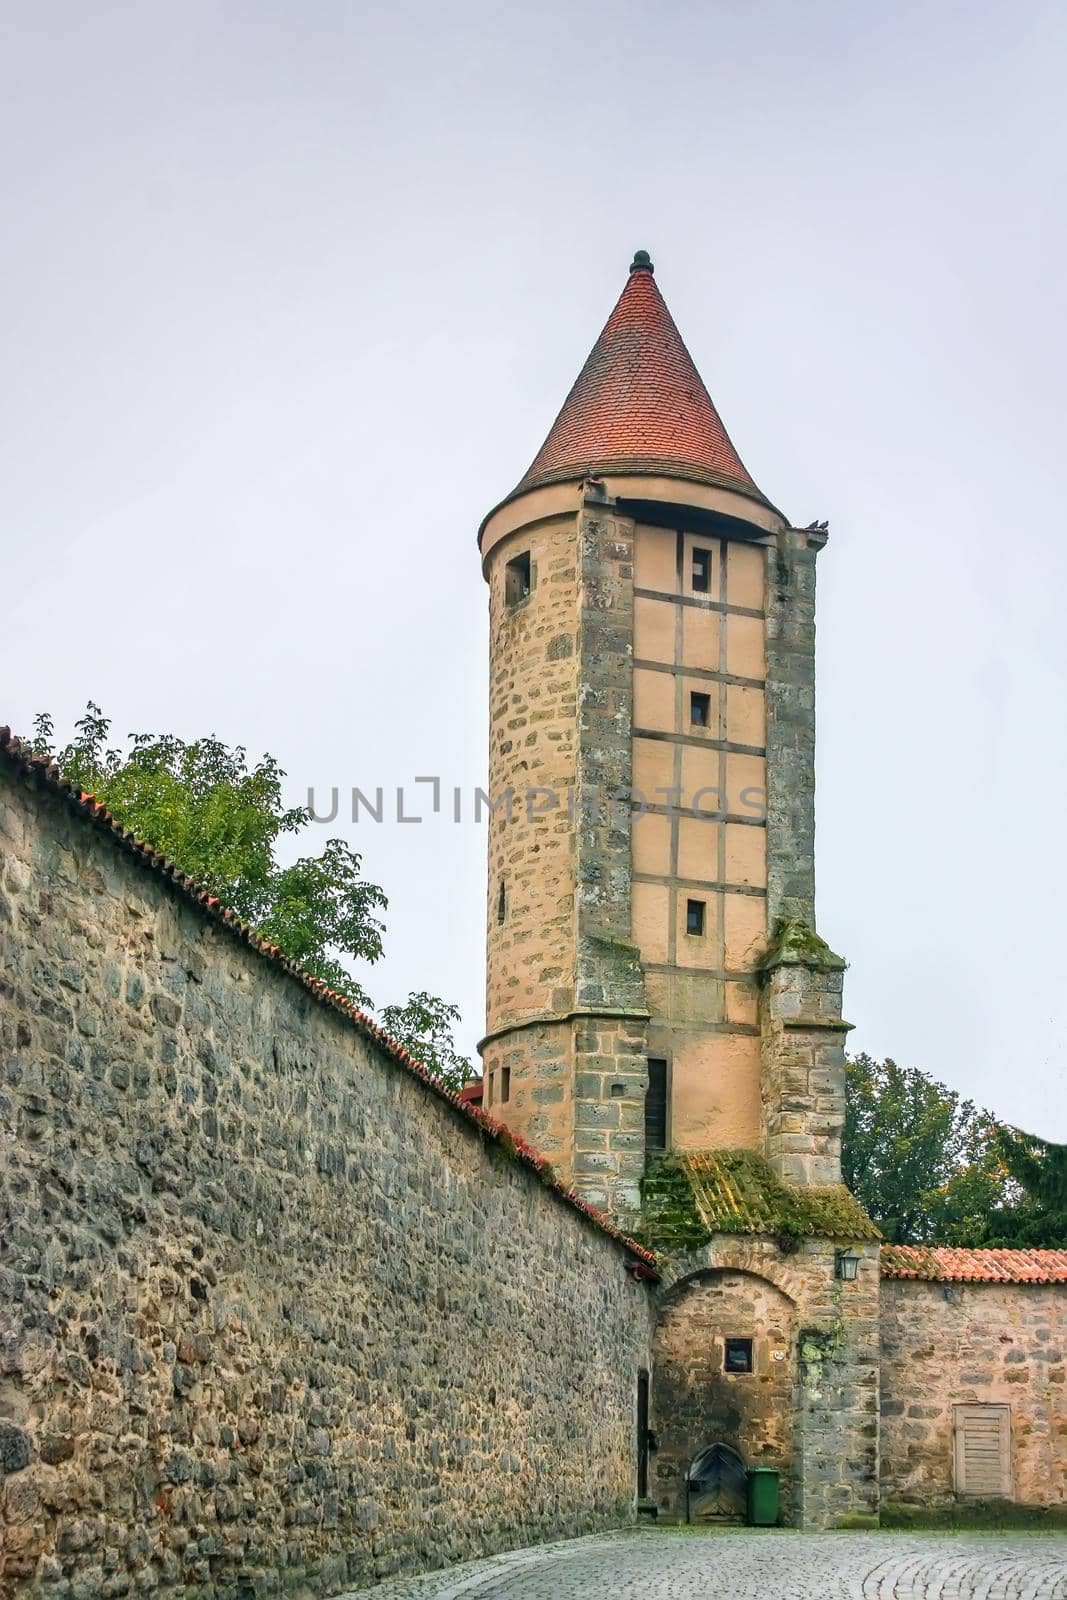 Wall and tower, Dinkelsbuhl, Bavaria, Germany by borisb17